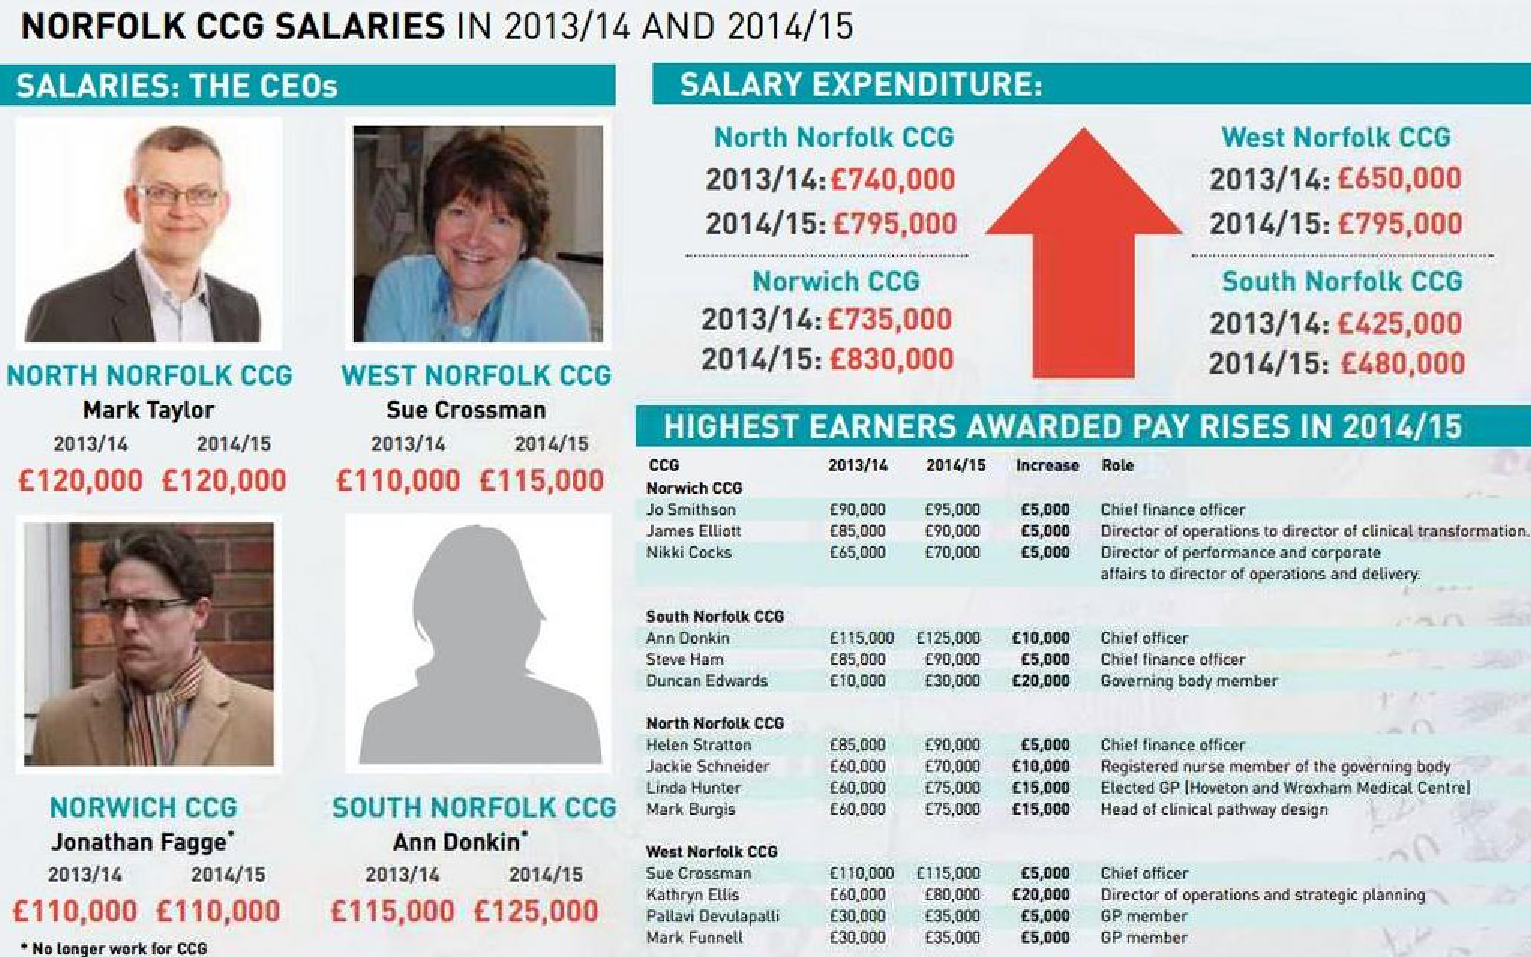 CCG Salaries Infographic from EDP